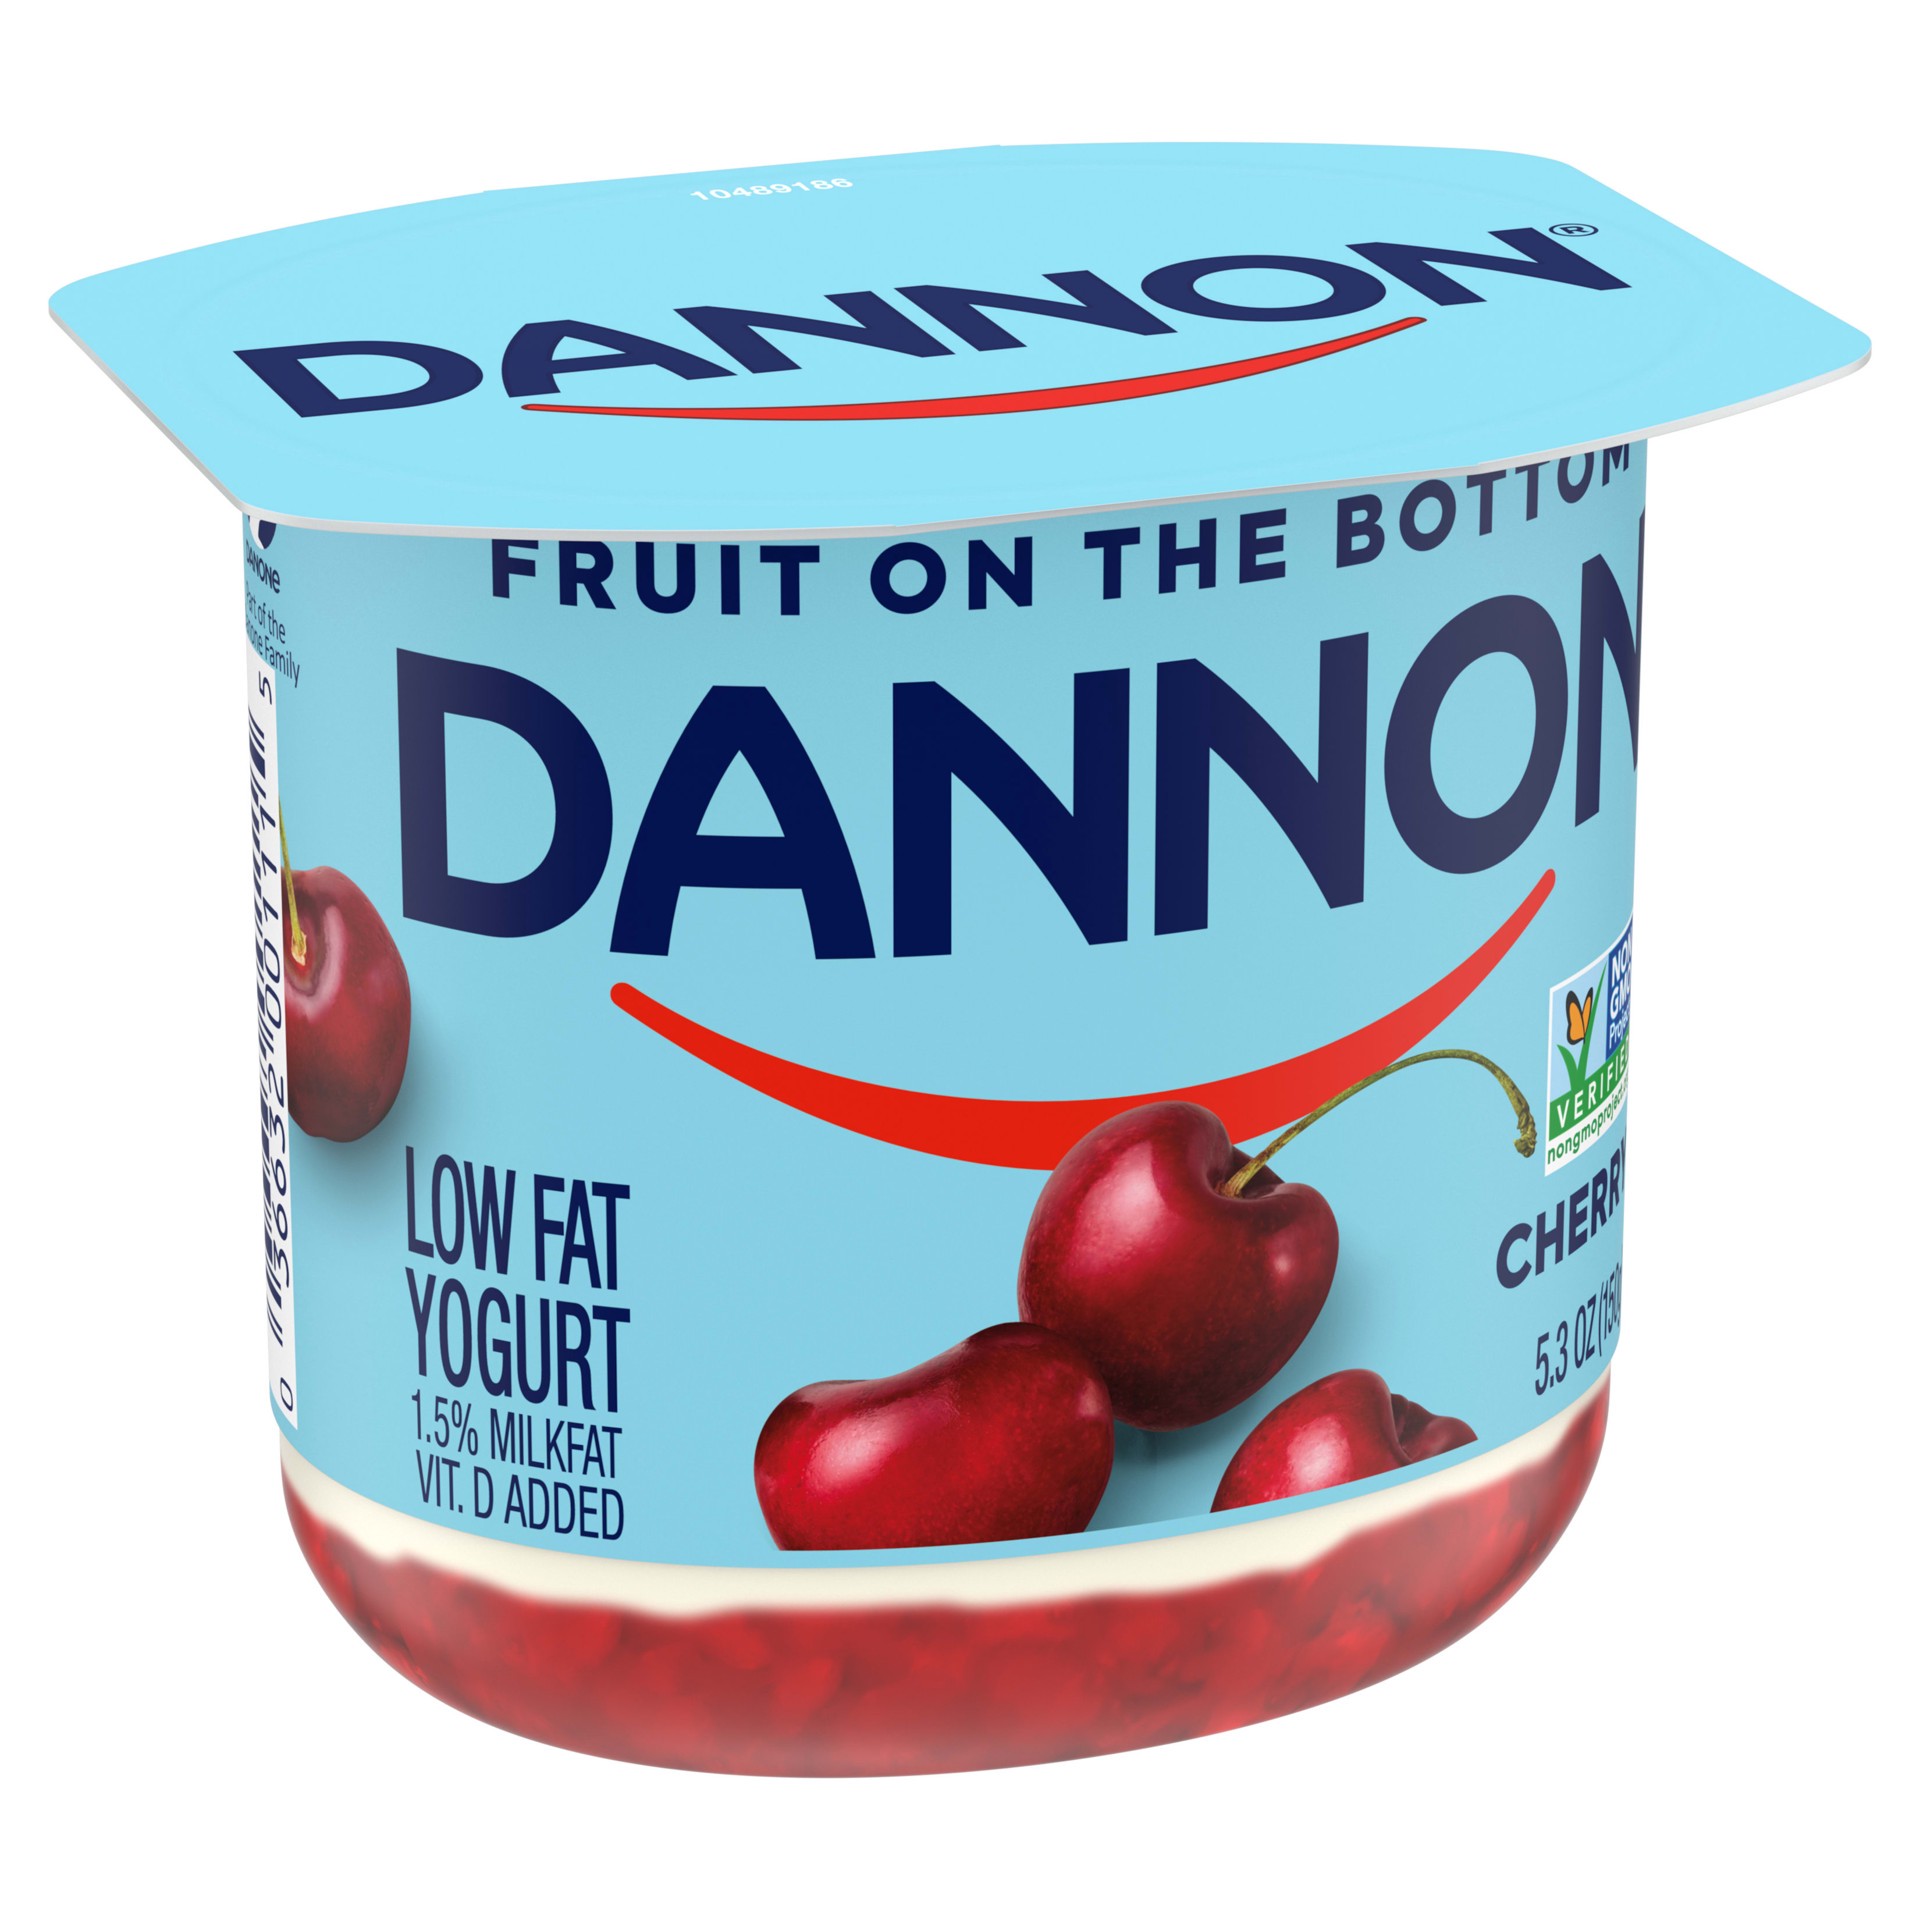 slide 5 of 5, Dannon Fruit on the Bottom Cherry Low Fat Yogurt, Gluten Free Snacks with Real Cherry Pieces, Good Source of Calcium and Vitamin D, 5.3 OZ Yogurt Container, 5.3 oz